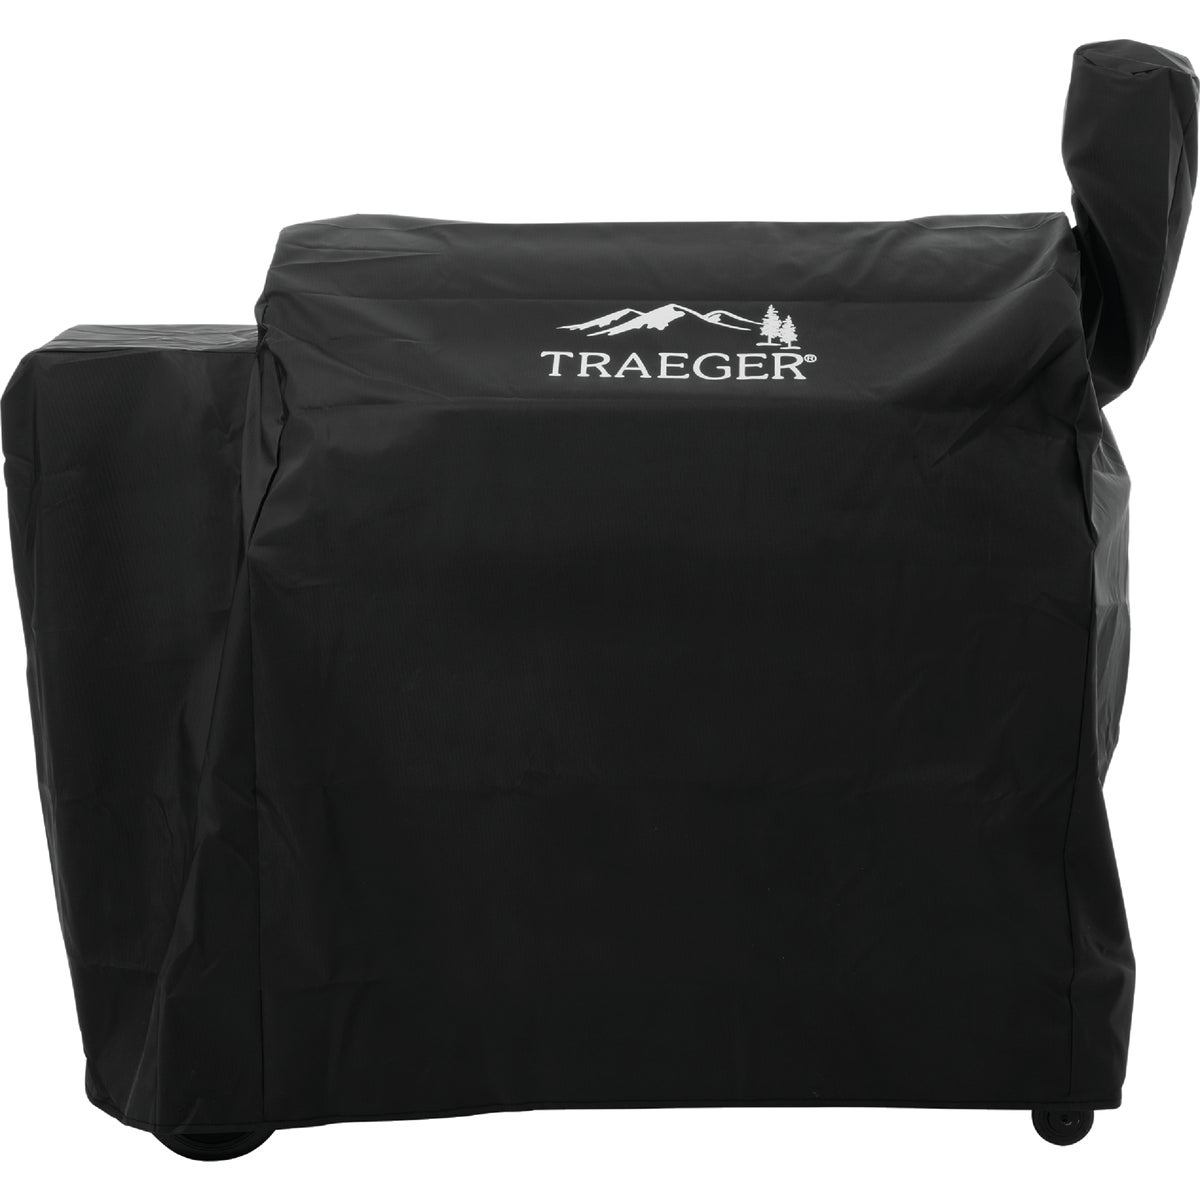 Item 808229, Full length, heavy duty, all weather material grill cover is made to last.